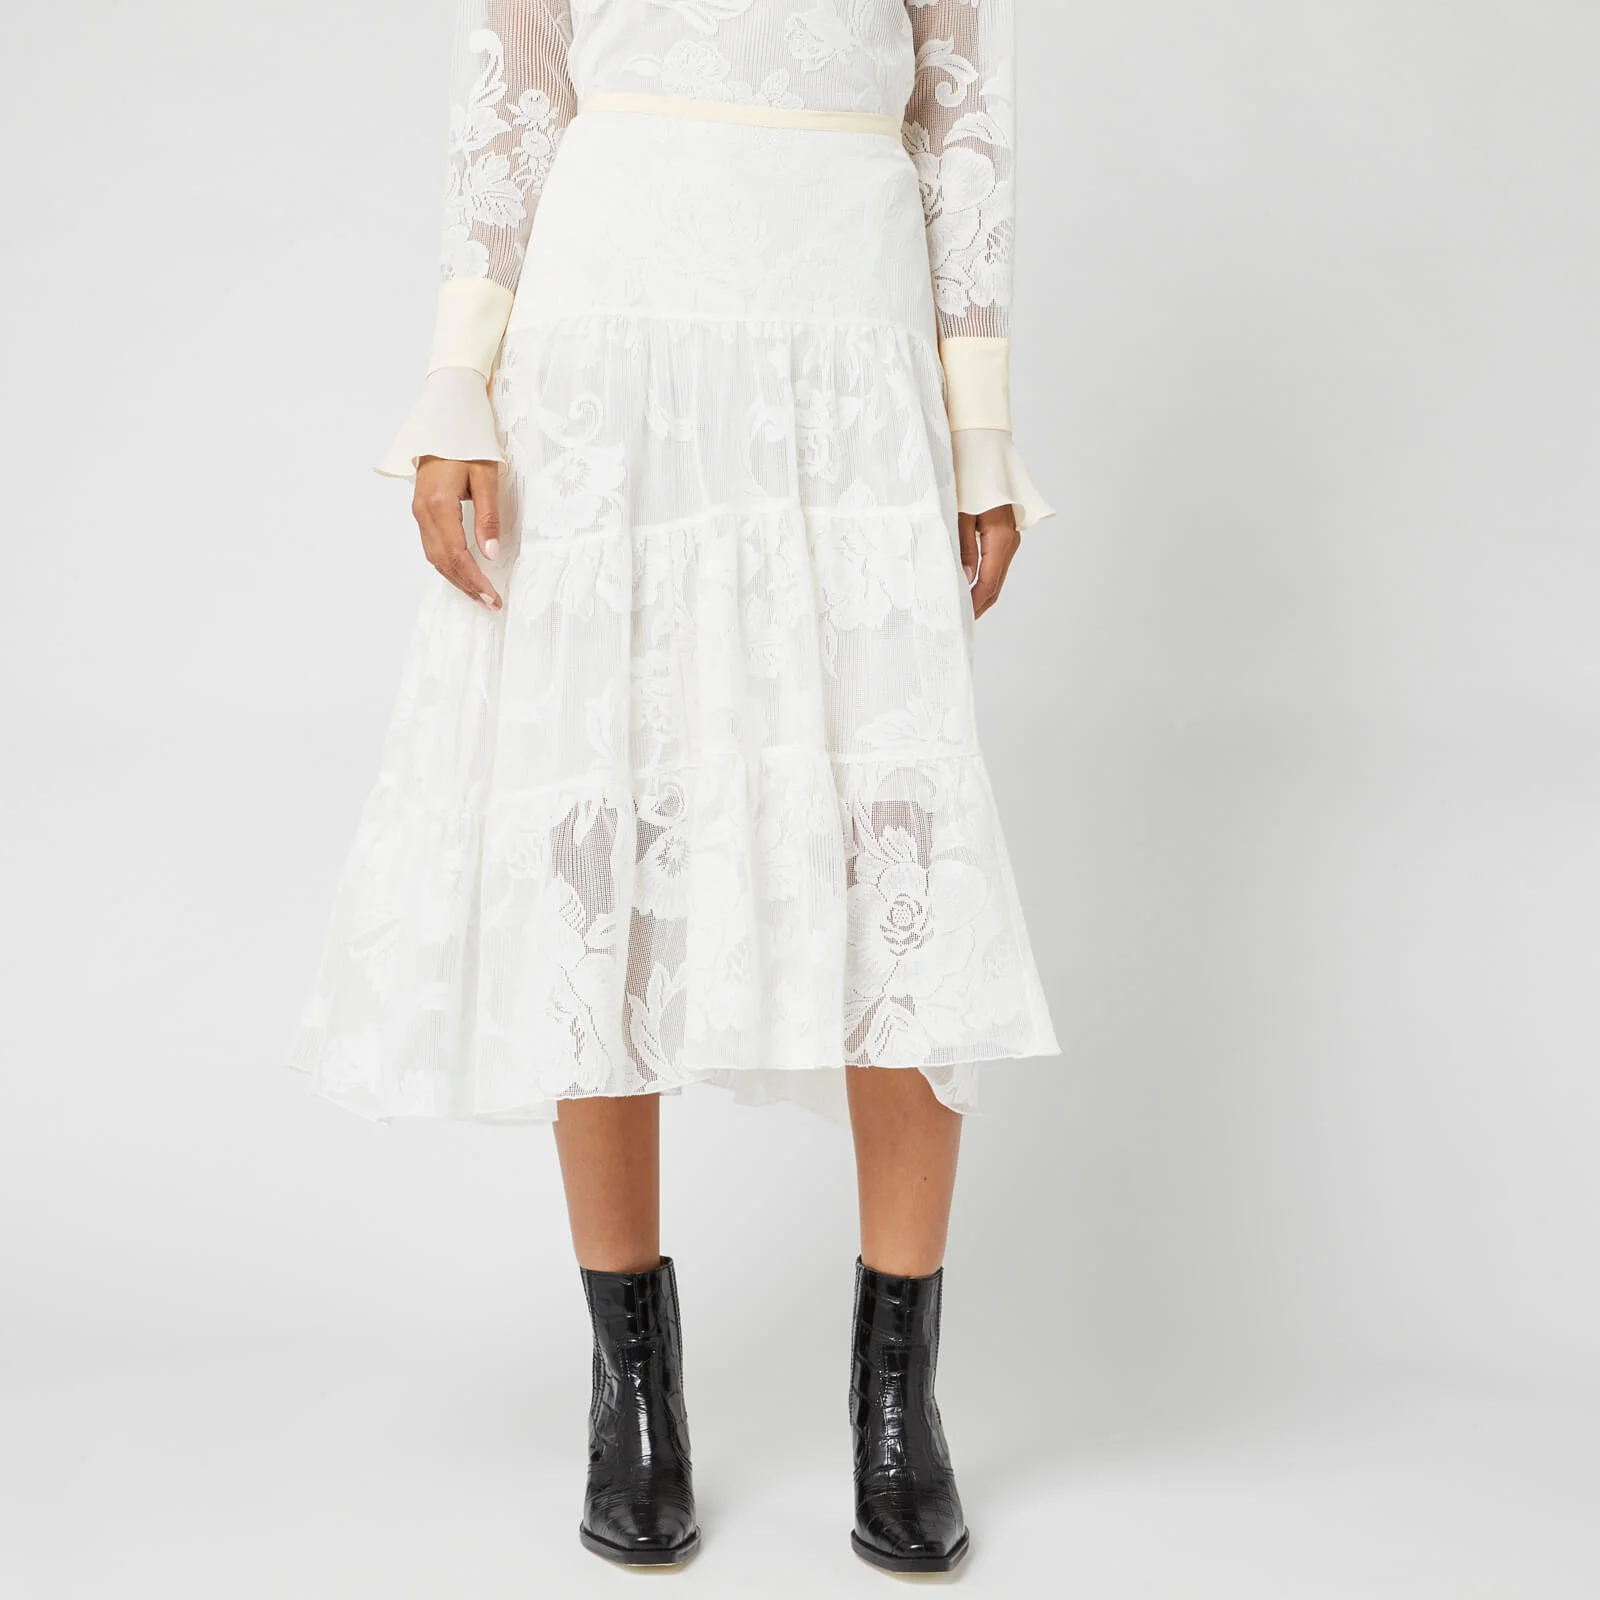 See By Chloé Women's Lace Detail Midi Skirt - Iconic Milk Image 1